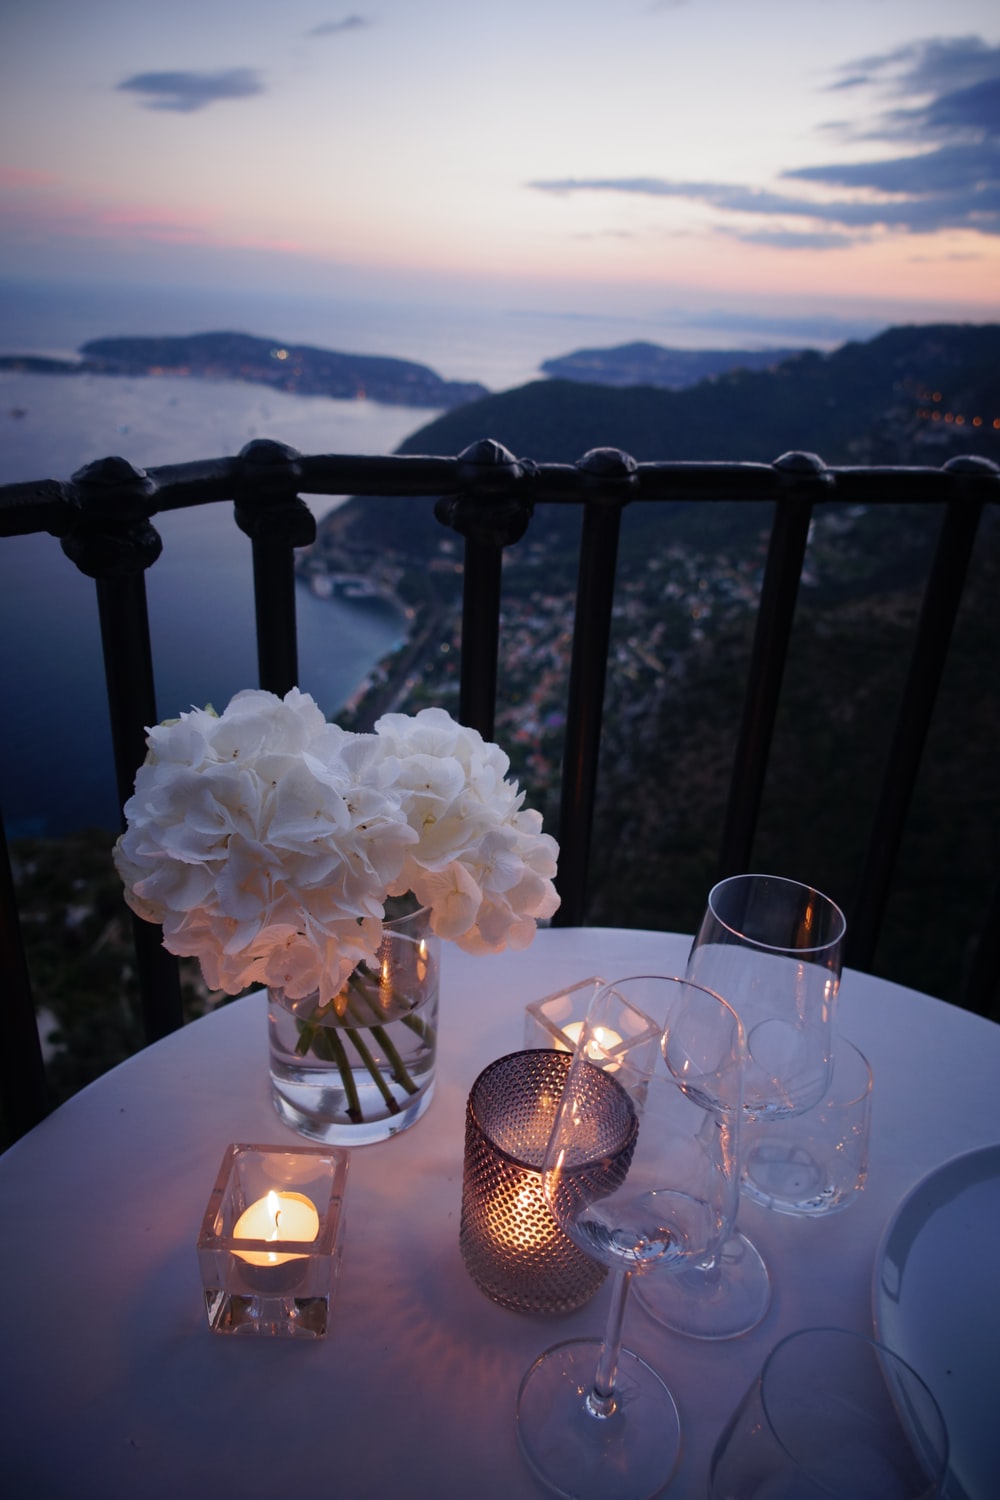 Romantic Dinner Picture [HD]. Download Free Image